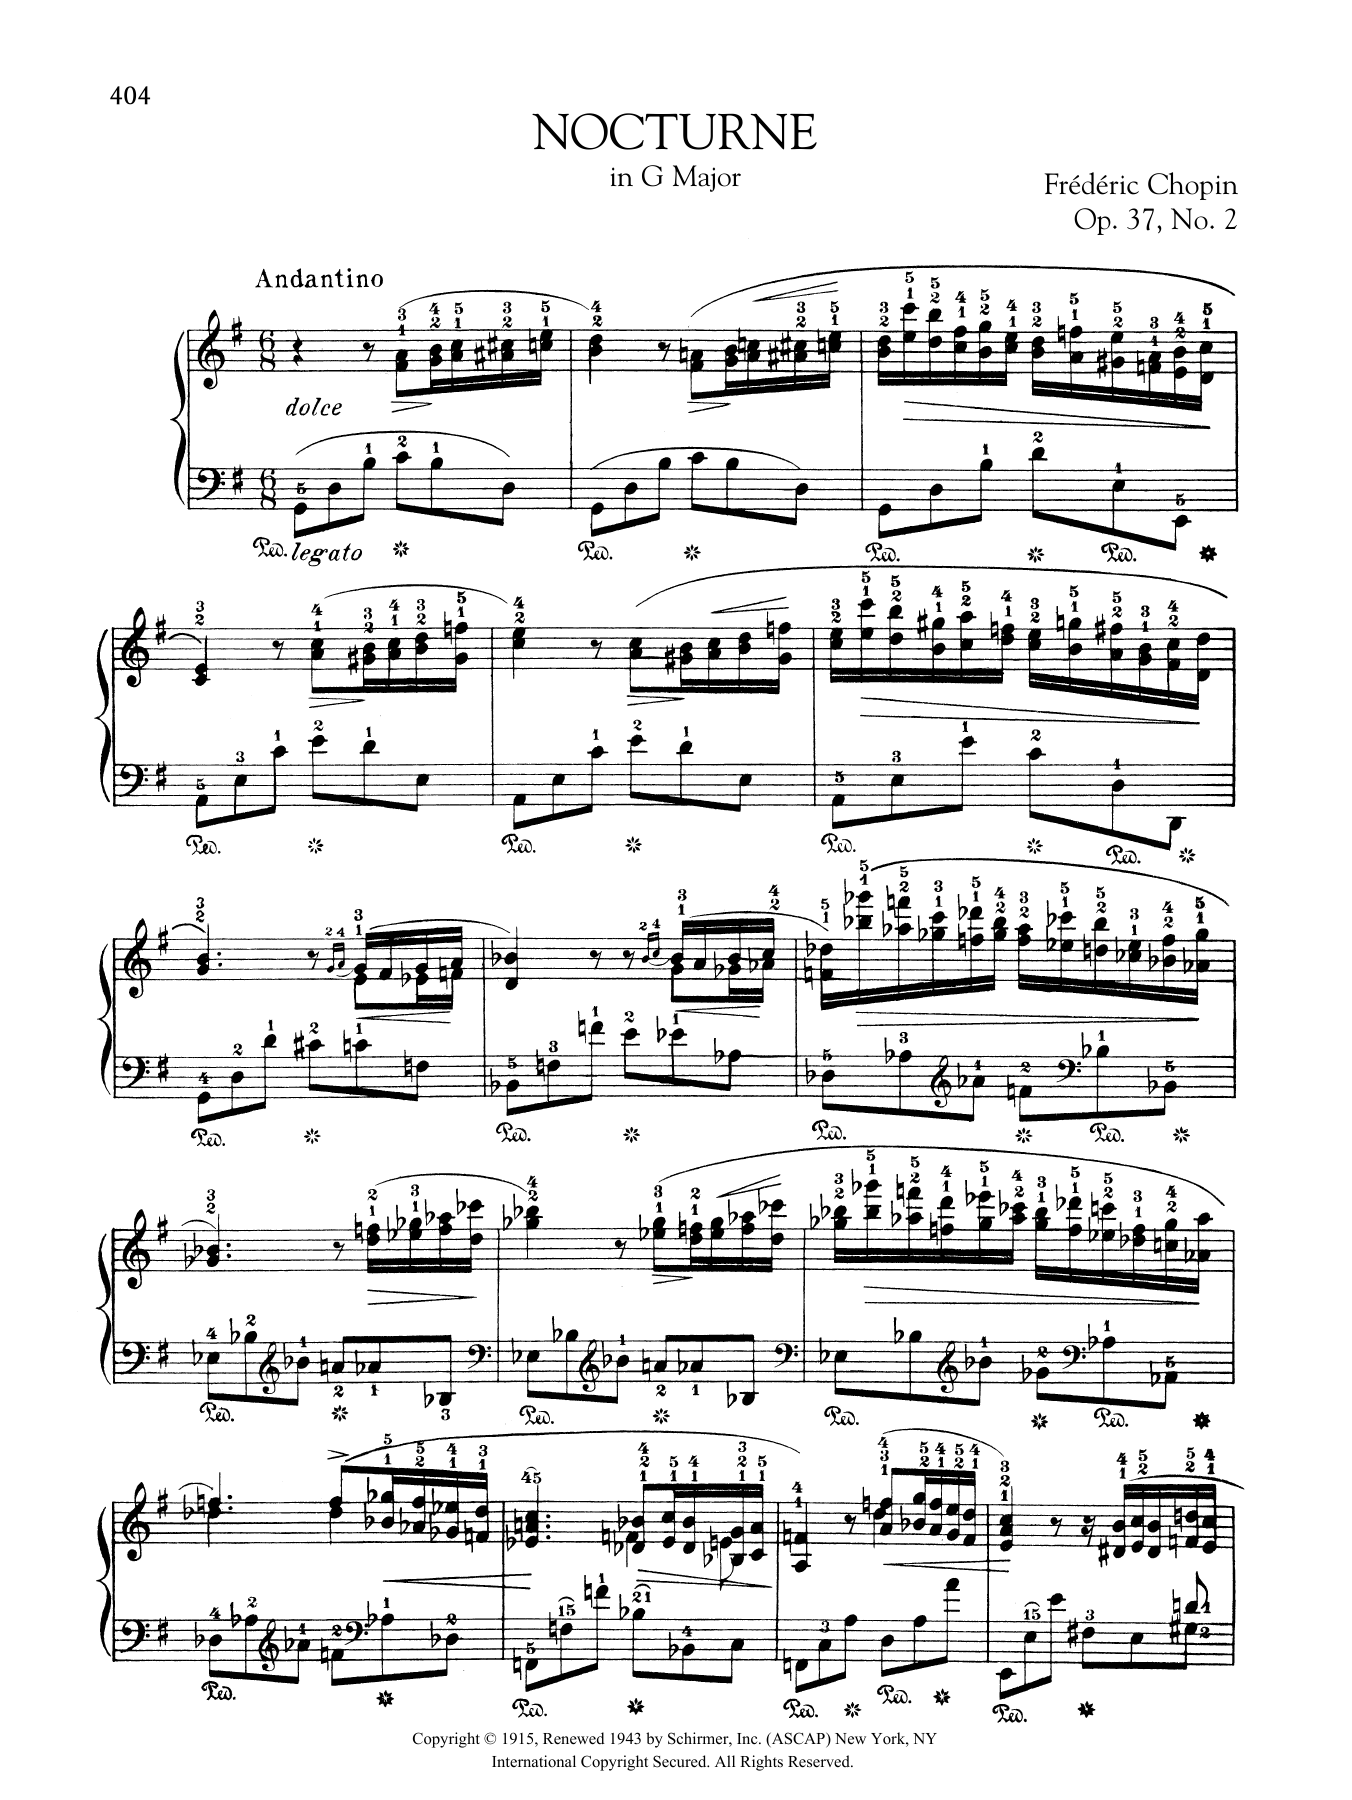 Download Frederic Chopin Nocturne in G Major, Op. 37, No. 2 Sheet Music